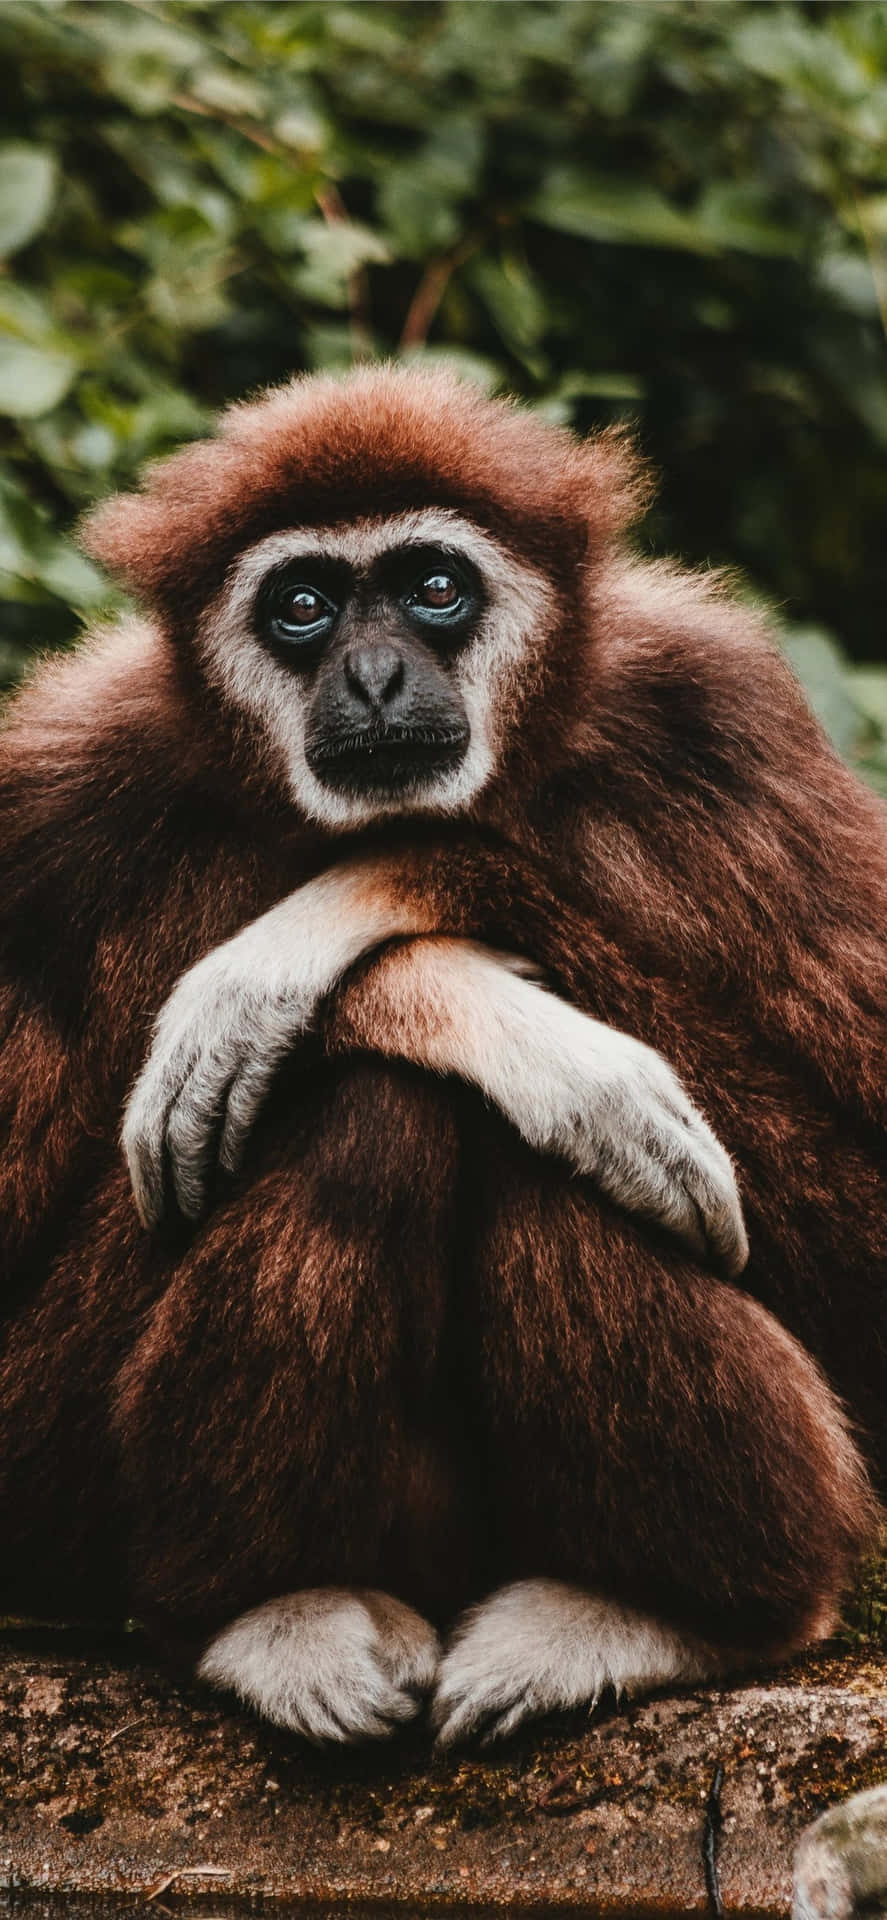 "Iphone X Gibbon, Taking Technology to New Heights"